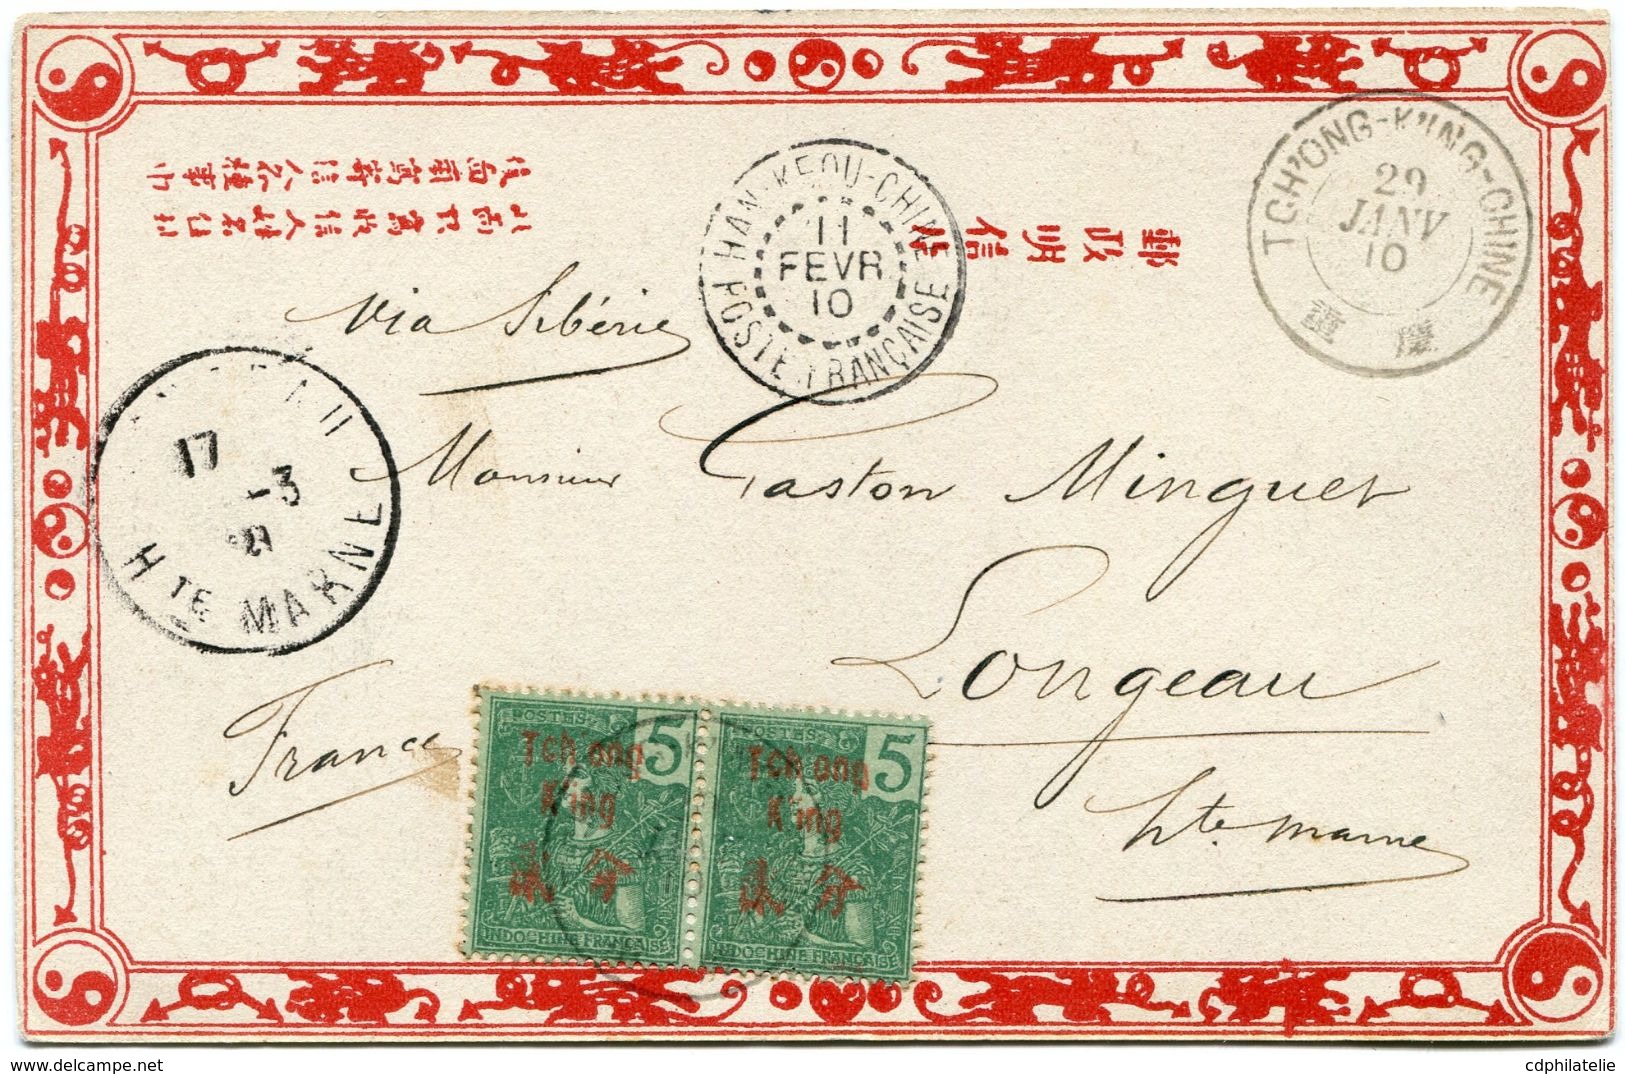 TCH'ONG-K'ING CARTE POSTALE DEPART TCH'ONG-K'ING-CHINE 29 JANV 10 POUR LA FRANCE - Covers & Documents